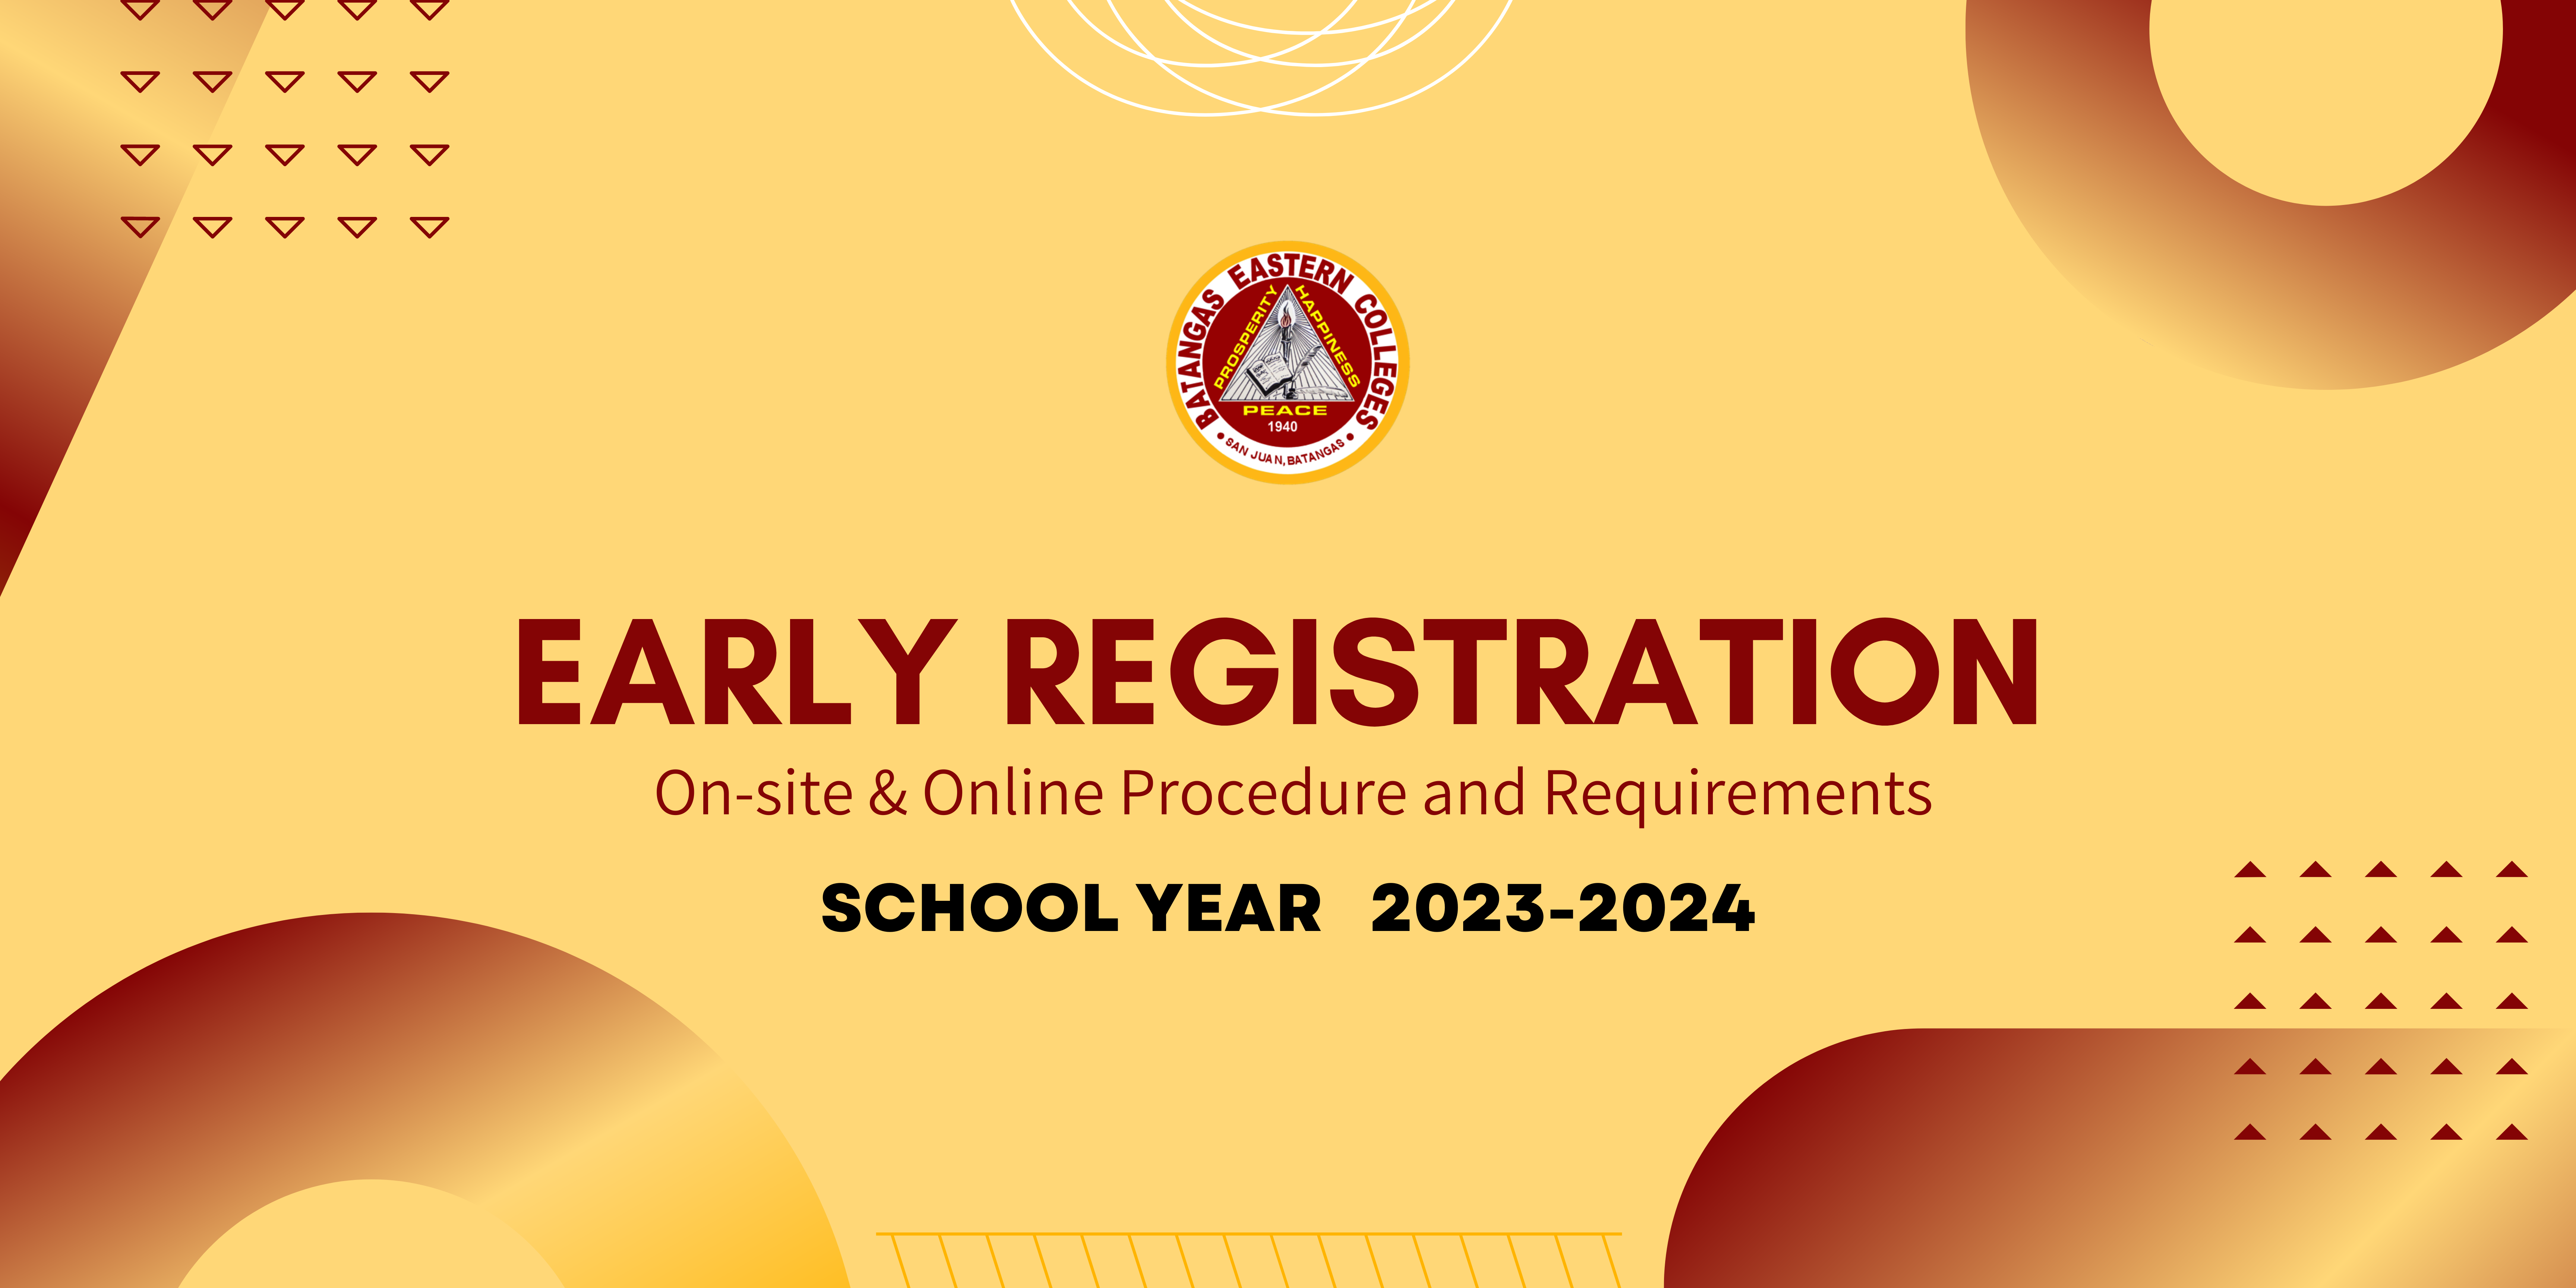 Deped Starts Early Registration For School Year 2023 2024 - Vrogue